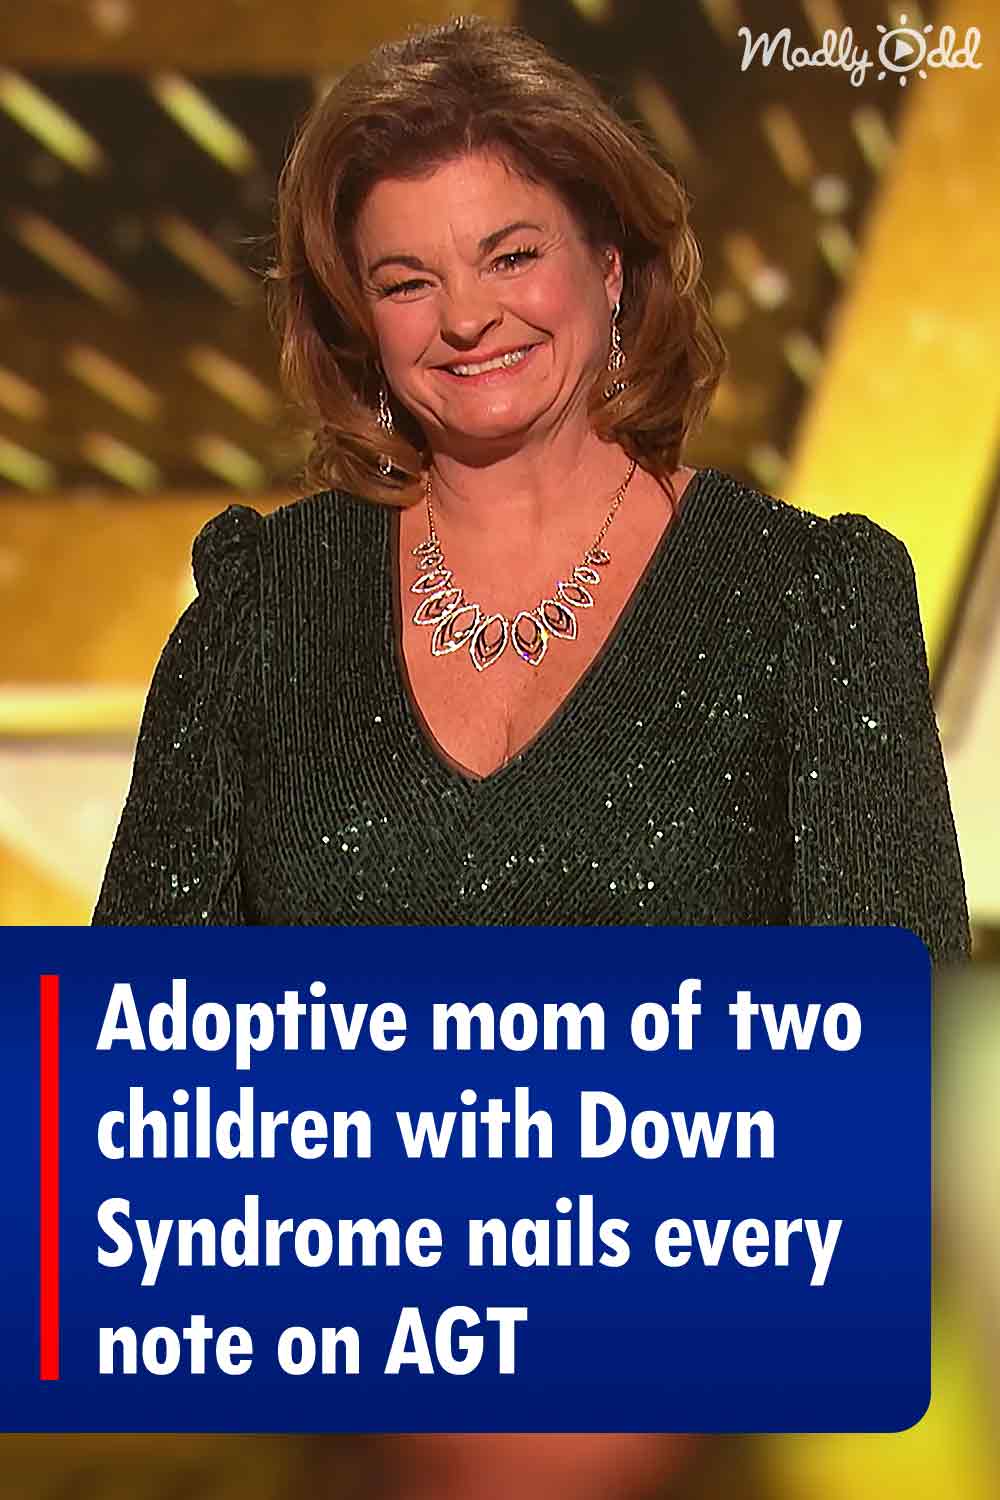 Adoptive mom of two children with Down Syndrome nails every note on AGT